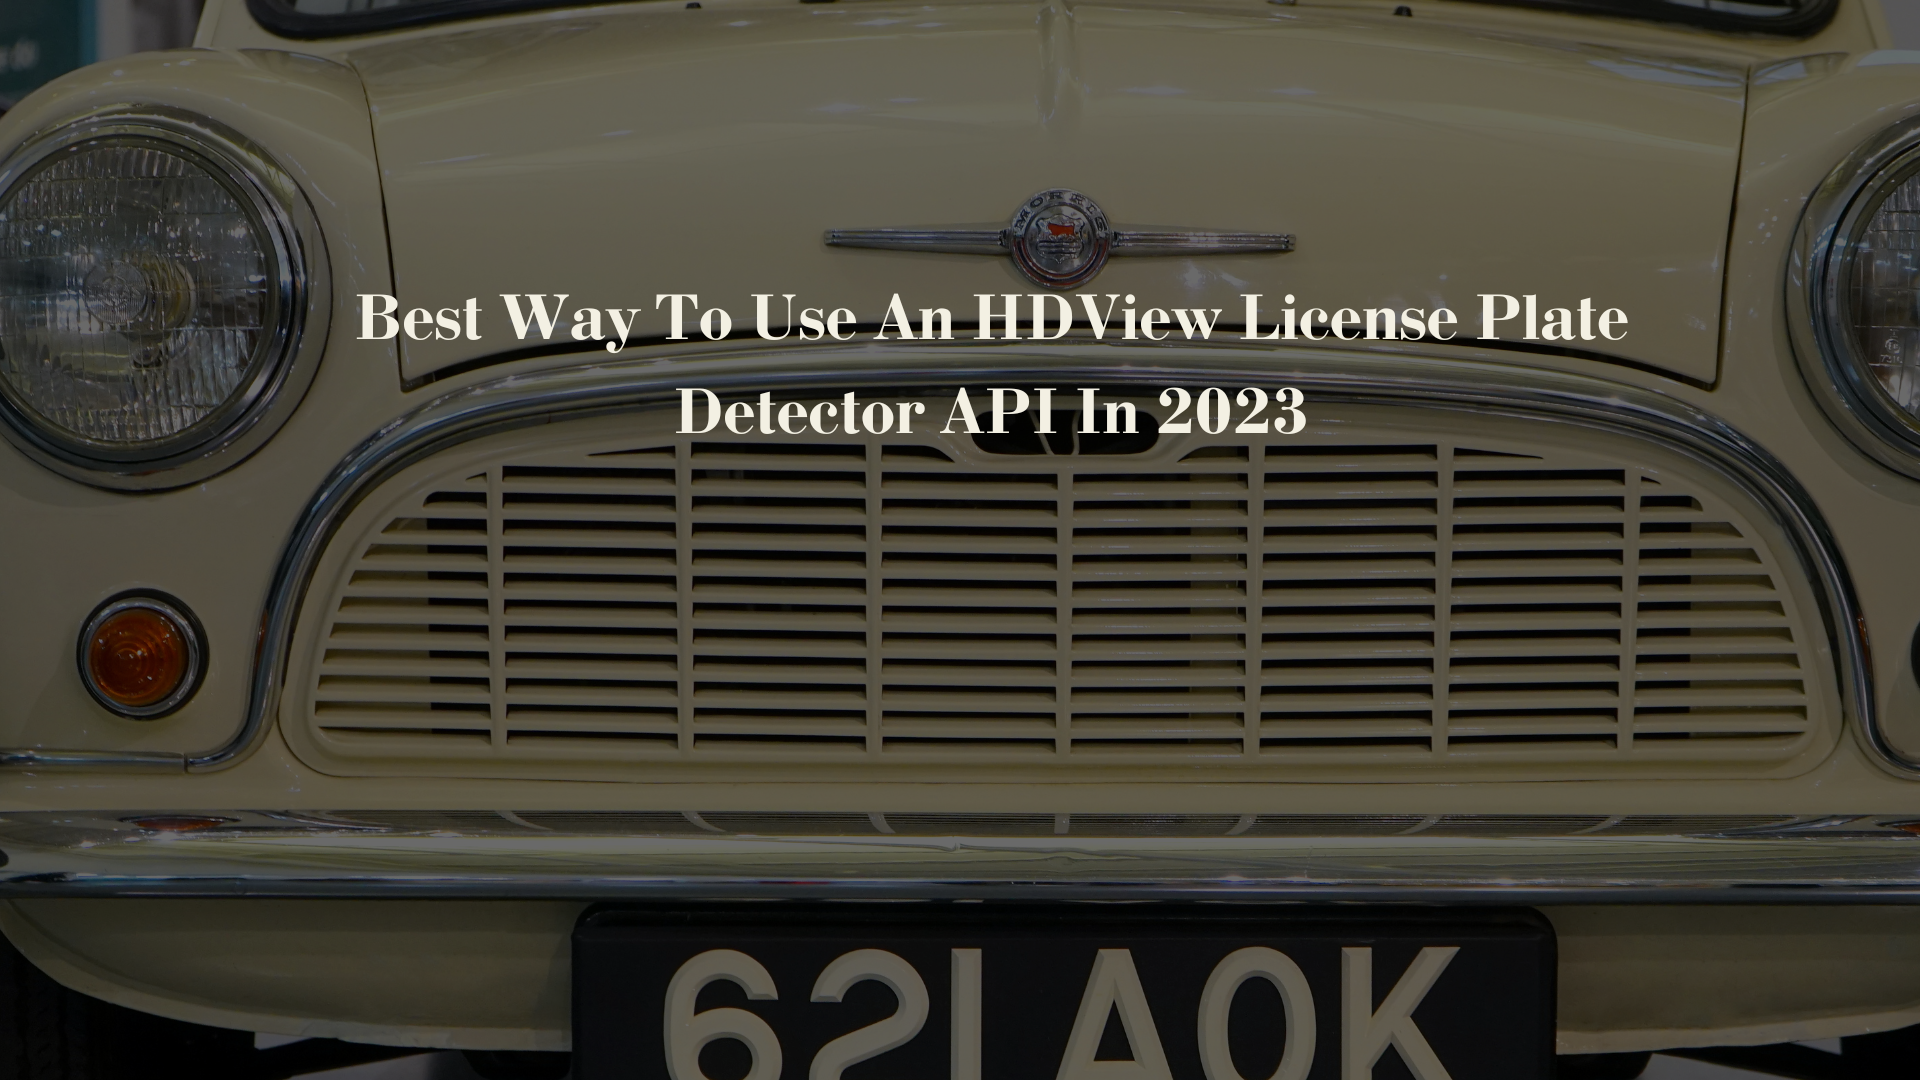 Best Way To Use An HDView License Plate Detector API In 2023